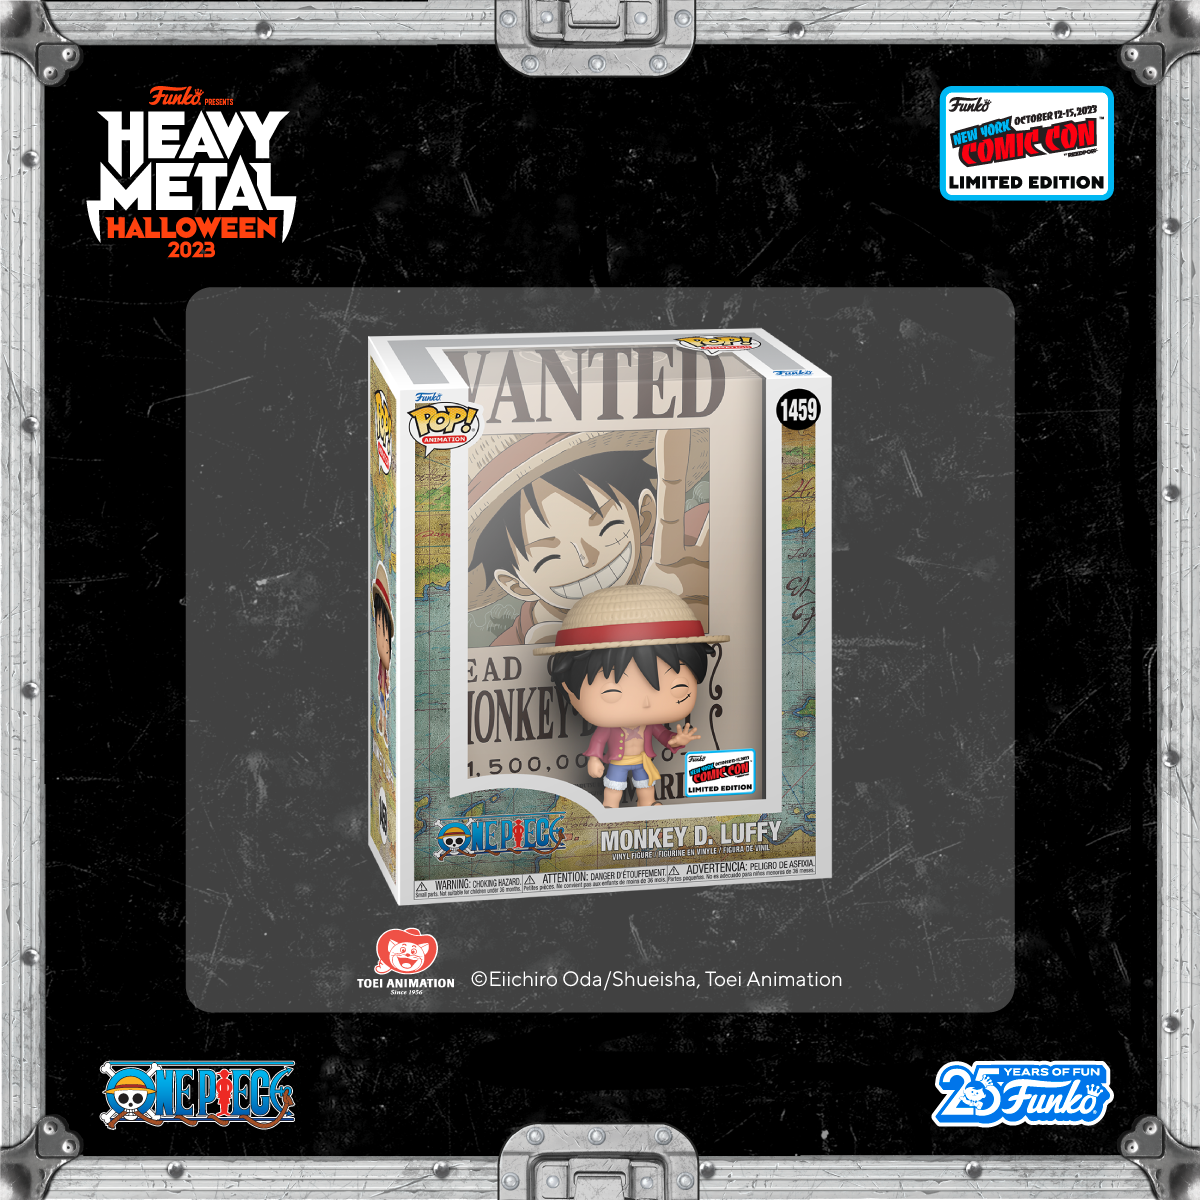 Pop! Monkey D. Luffy stands in front of a bounty poster in this New York Comic Con exclusive collectible.